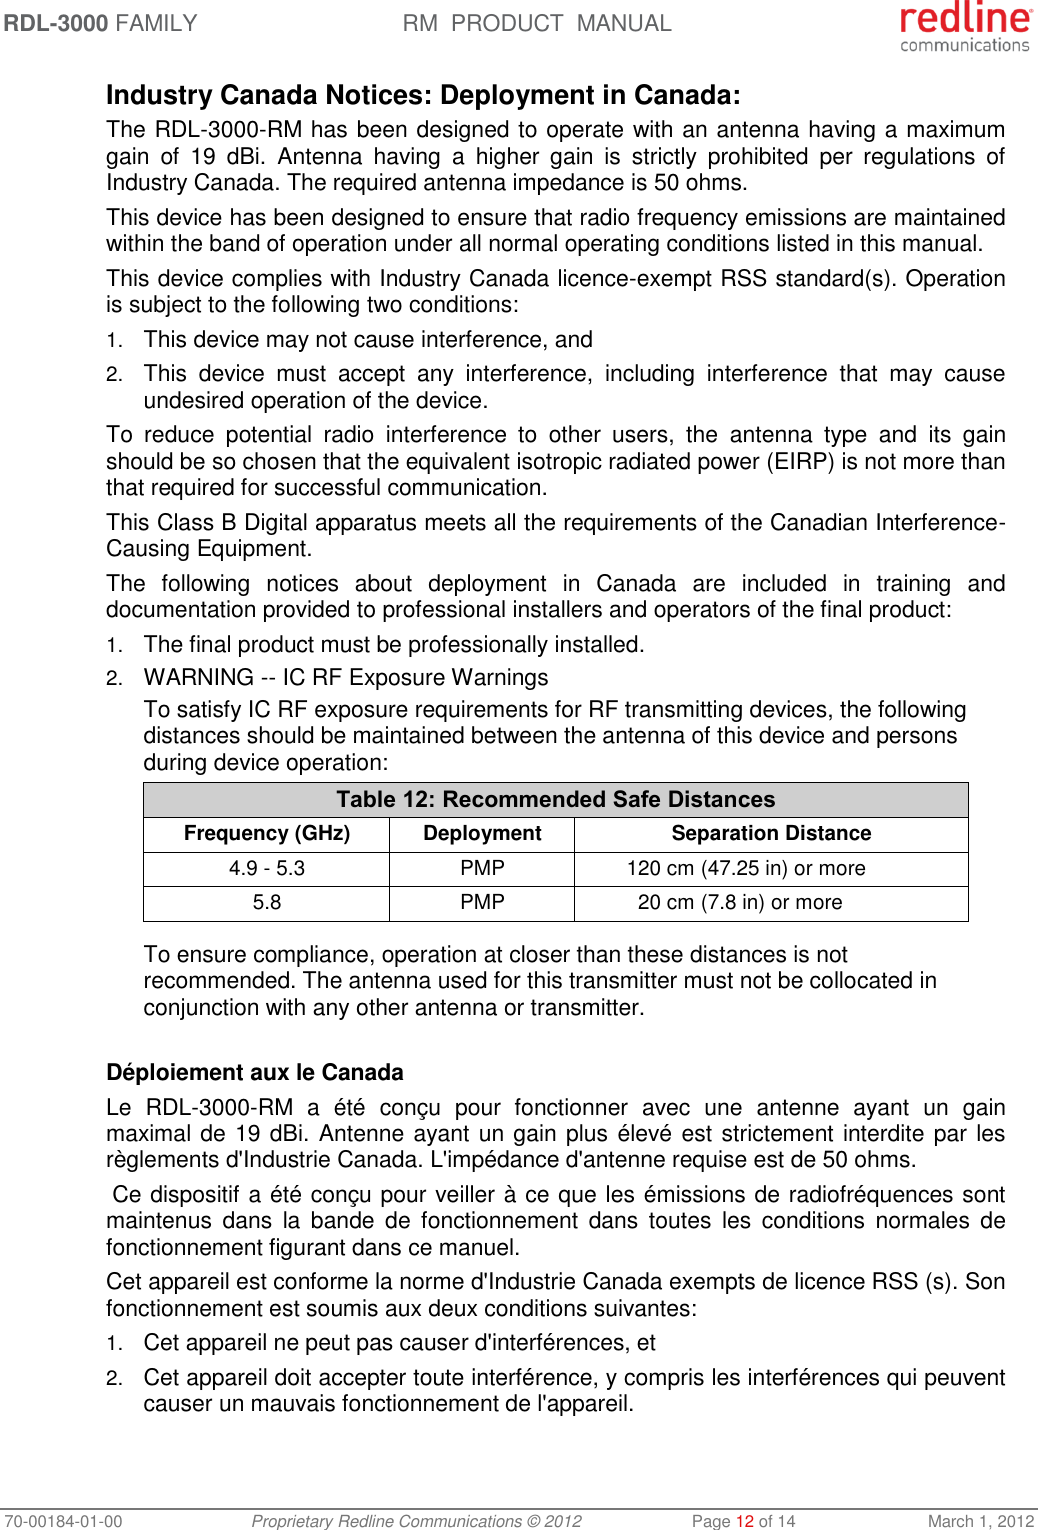 RDL-3000 FAMILY RM  PRODUCT  MANUAL 70-00184-01-00 Proprietary Redline Communications © 2012  Page 12 of 14  March 1, 2012 Industry Canada Notices: Deployment in Canada: The RDL-3000-RM has been designed to operate with an antenna having a maximum gain  of  19  dBi.  Antenna  having  a  higher  gain  is  strictly  prohibited  per  regulations  of Industry Canada. The required antenna impedance is 50 ohms. This device has been designed to ensure that radio frequency emissions are maintained within the band of operation under all normal operating conditions listed in this manual. This device complies with Industry Canada licence-exempt RSS standard(s). Operation is subject to the following two conditions: 1. This device may not cause interference, and  2. This  device  must  accept  any  interference,  including  interference  that  may  cause undesired operation of the device. To  reduce  potential  radio  interference  to  other  users,  the  antenna  type  and  its  gain should be so chosen that the equivalent isotropic radiated power (EIRP) is not more than that required for successful communication. This Class B Digital apparatus meets all the requirements of the Canadian Interference-Causing Equipment. The  following  notices  about  deployment  in  Canada  are  included  in  training  and documentation provided to professional installers and operators of the final product: 1. The final product must be professionally installed. 2. WARNING -- IC RF Exposure Warnings To satisfy IC RF exposure requirements for RF transmitting devices, the following distances should be maintained between the antenna of this device and persons during device operation: Table 12: Recommended Safe Distances Frequency (GHz) Deployment Separation Distance 4.9 - 5.3 PMP 120 cm (47.25 in) or more 5.8 PMP 20 cm (7.8 in) or more   To ensure compliance, operation at closer than these distances is not recommended. The antenna used for this transmitter must not be collocated in conjunction with any other antenna or transmitter.  Déploiement aux le Canada Le  RDL-3000-RM  a  été  conçu  pour  fonctionner  avec  une  antenne  ayant  un  gain maximal de 19 dBi. Antenne ayant un gain plus élevé est strictement interdite par les règlements d&apos;Industrie Canada. L&apos;impédance d&apos;antenne requise est de 50 ohms.  Ce dispositif a été conçu pour veiller à ce que les émissions de radiofréquences sont maintenus  dans  la  bande  de  fonctionnement  dans  toutes  les  conditions  normales  de fonctionnement figurant dans ce manuel. Cet appareil est conforme la norme d&apos;Industrie Canada exempts de licence RSS (s). Son fonctionnement est soumis aux deux conditions suivantes: 1. Cet appareil ne peut pas causer d&apos;interférences, et 2. Cet appareil doit accepter toute interférence, y compris les interférences qui peuvent causer un mauvais fonctionnement de l&apos;appareil. 